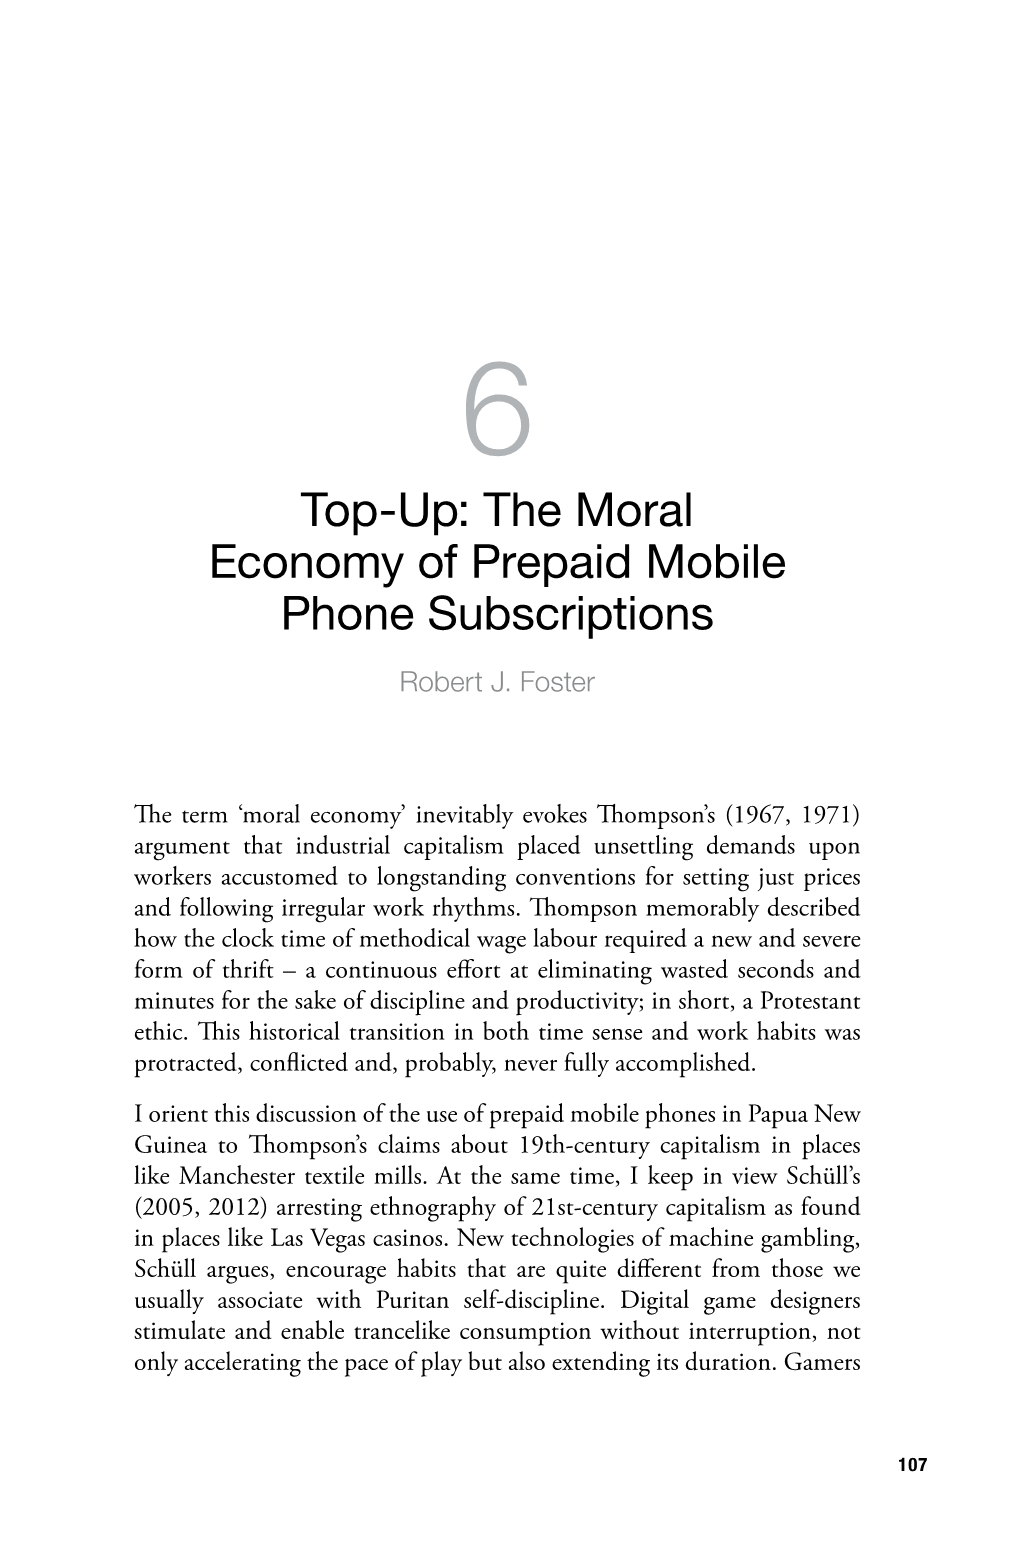 The Moral Economy of Prepaid Mobile Phone Subscriptions Robert J